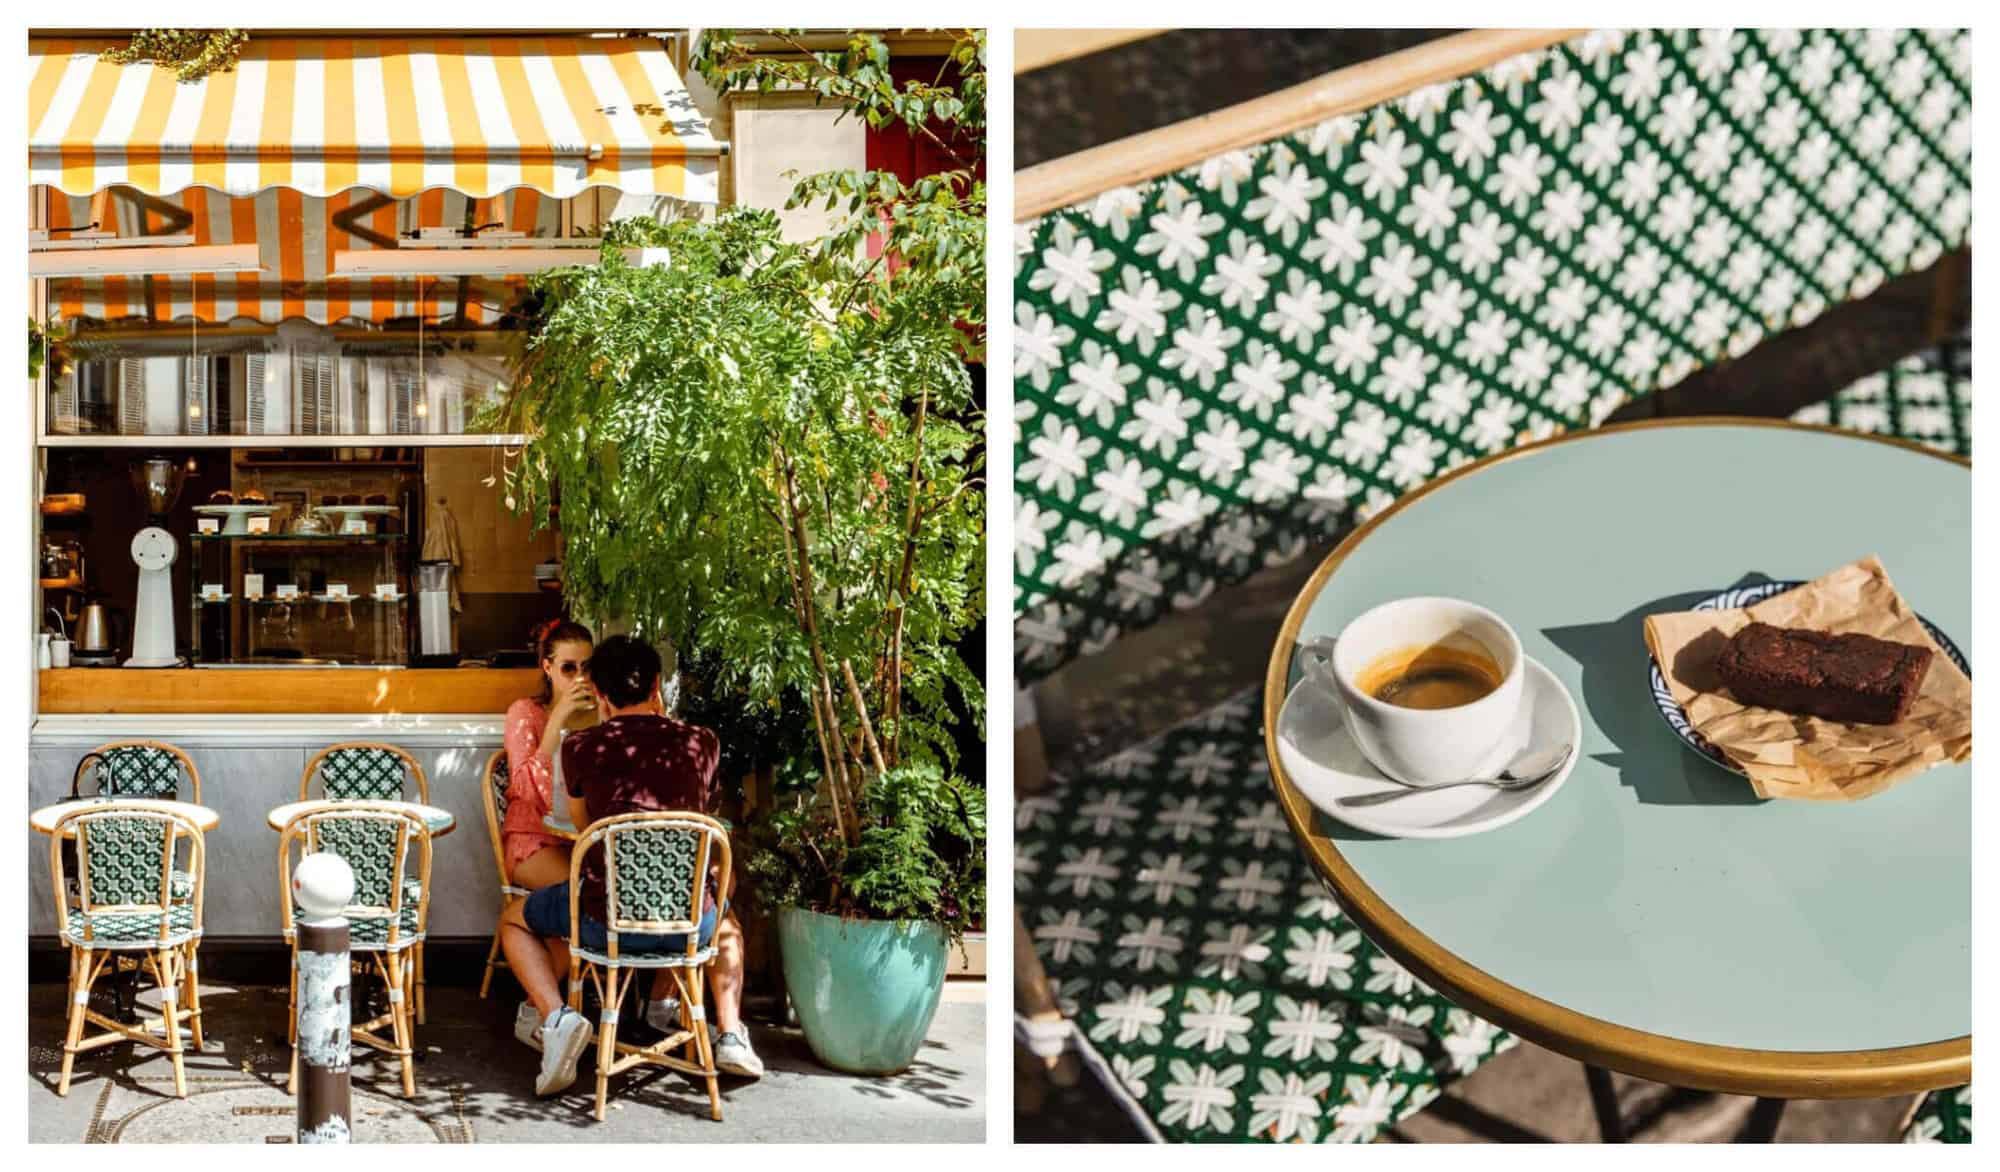 Left: A man and a woman are drinking beverages at a terrace of a restaurant with green tables and chairs and yellow and white tents. Right: A cup of espresso and a rectangular brownie are served atop a mint colored table with gold finishing.